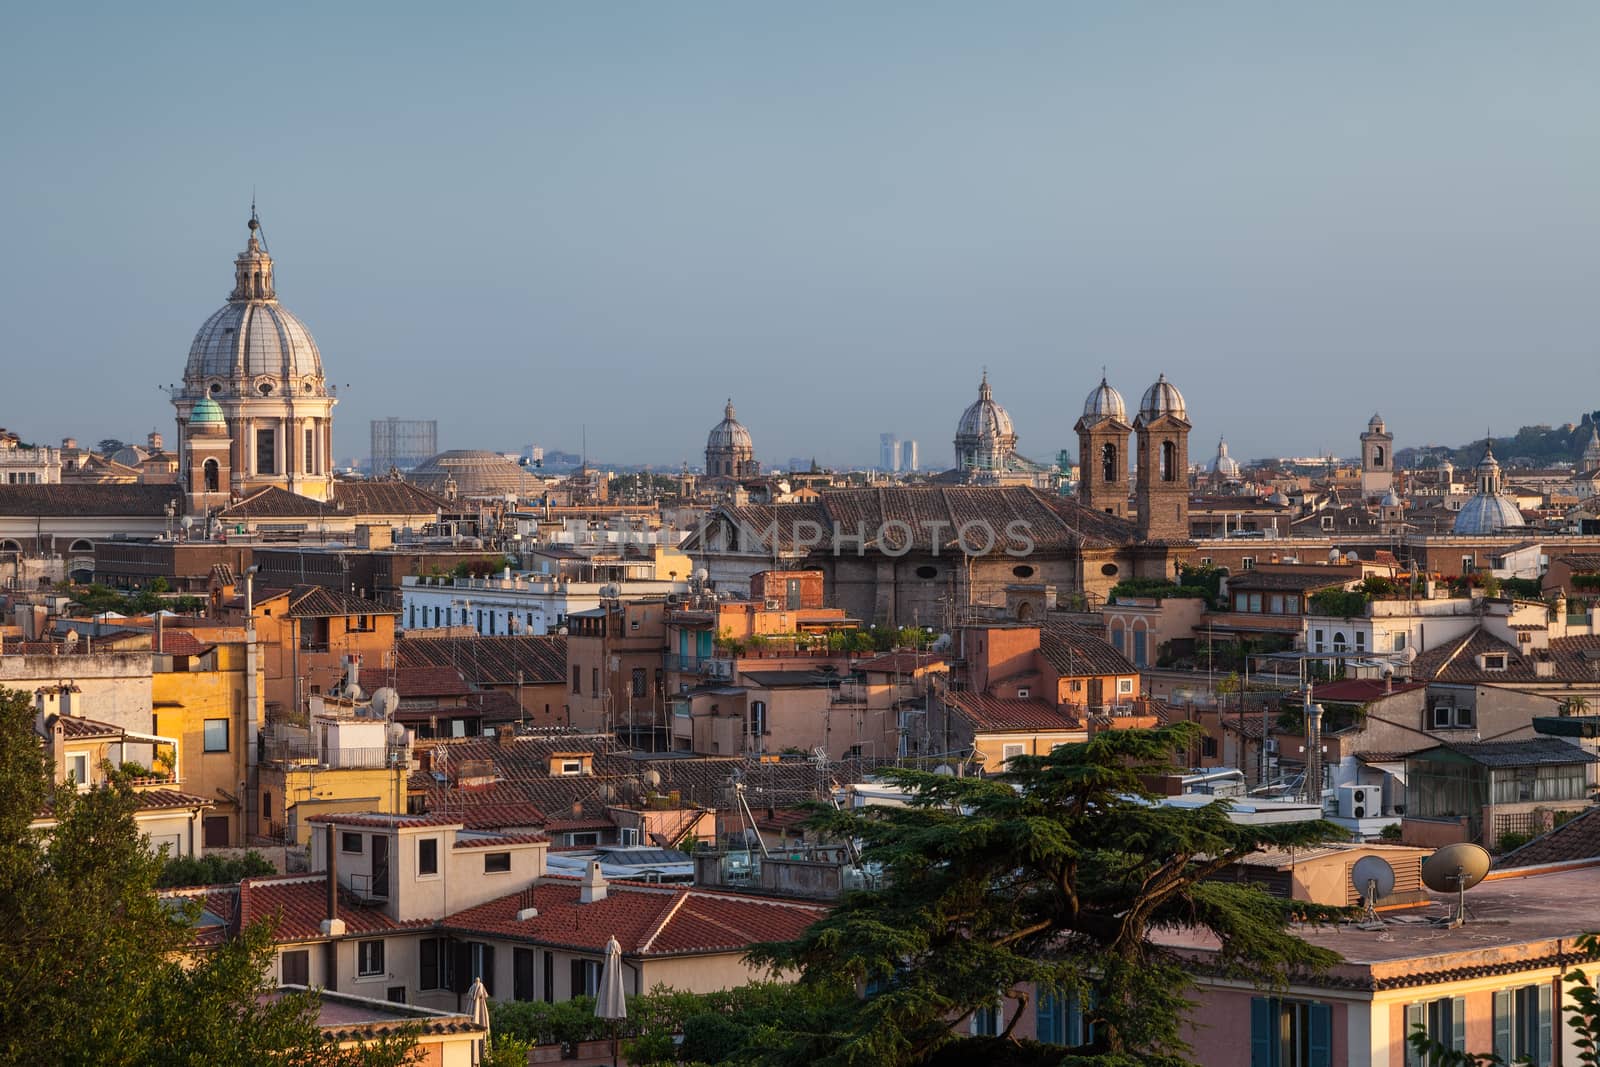 Roofs of Rome by mot1963